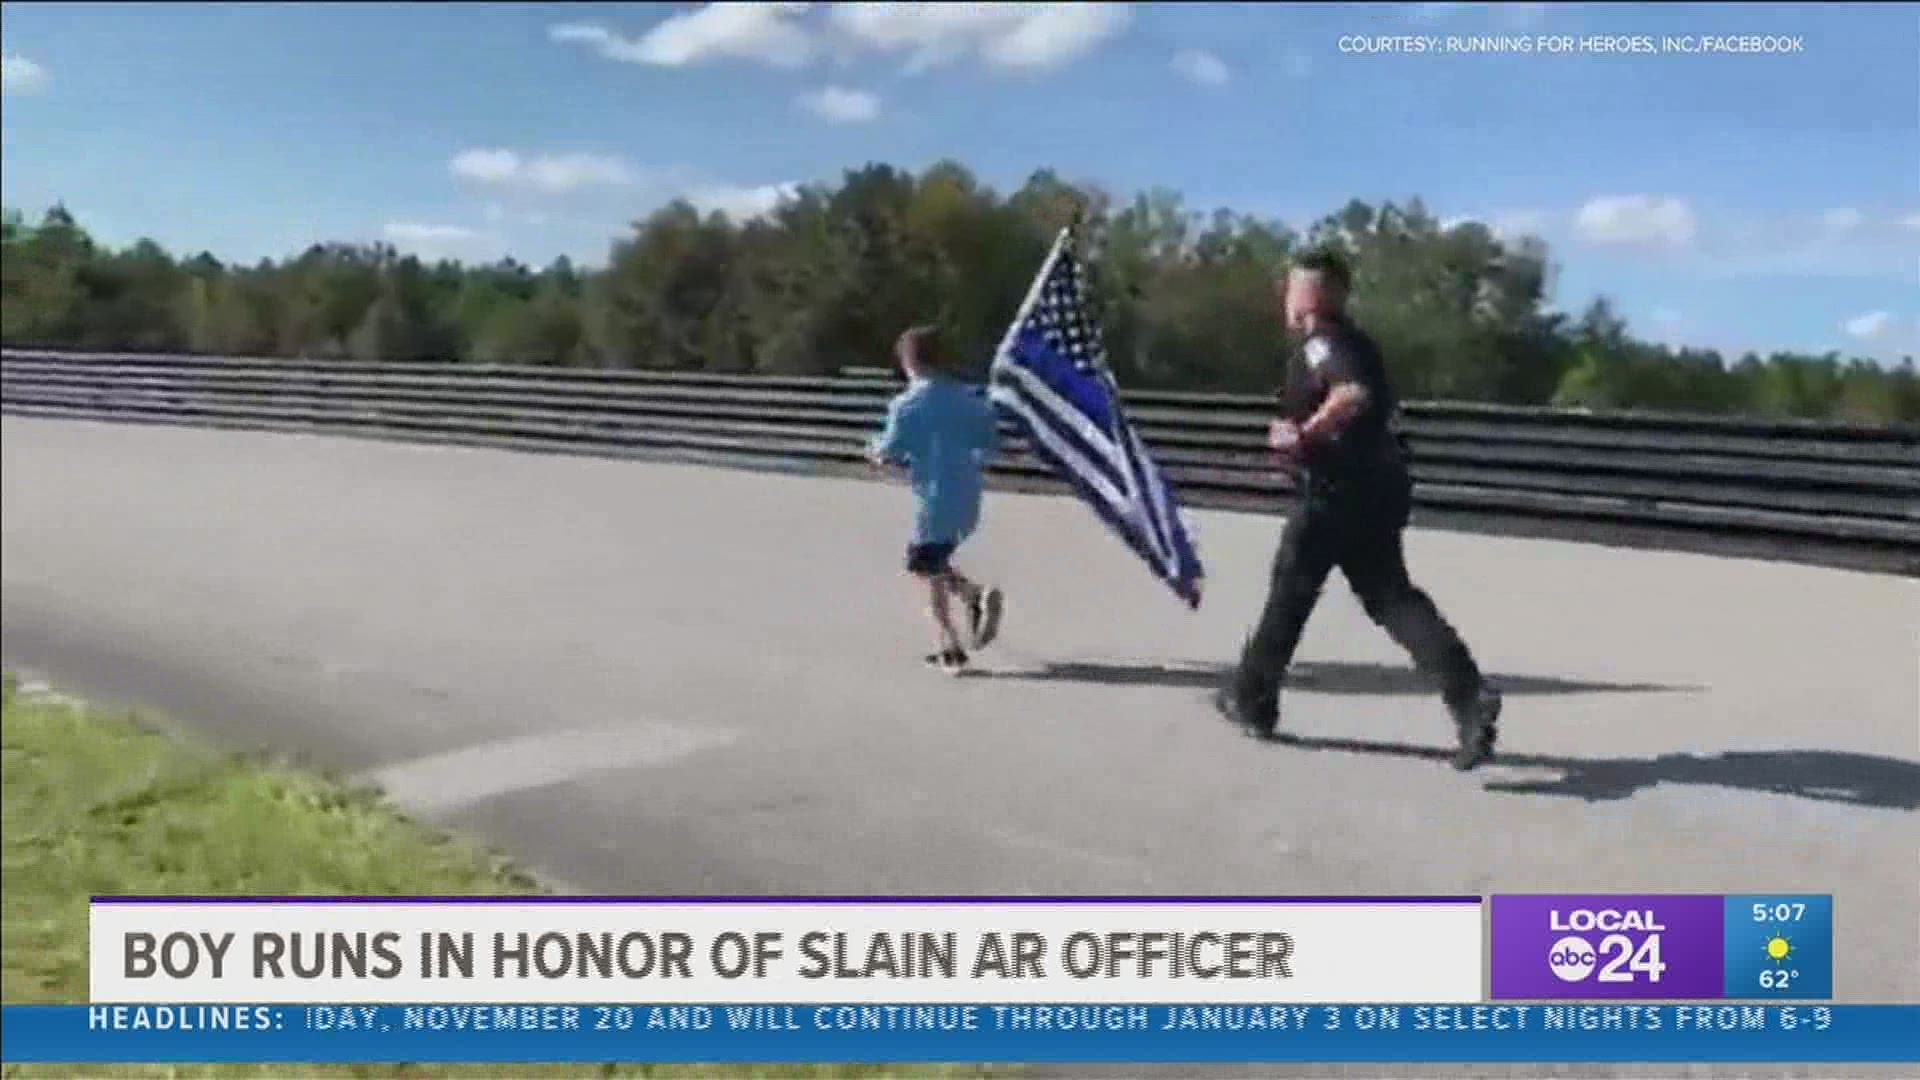 Zechariah Cartledge from Clay County, Florida, founded Running 4 Heroes as a way to raise money for first responders while honoring fallen heroes.